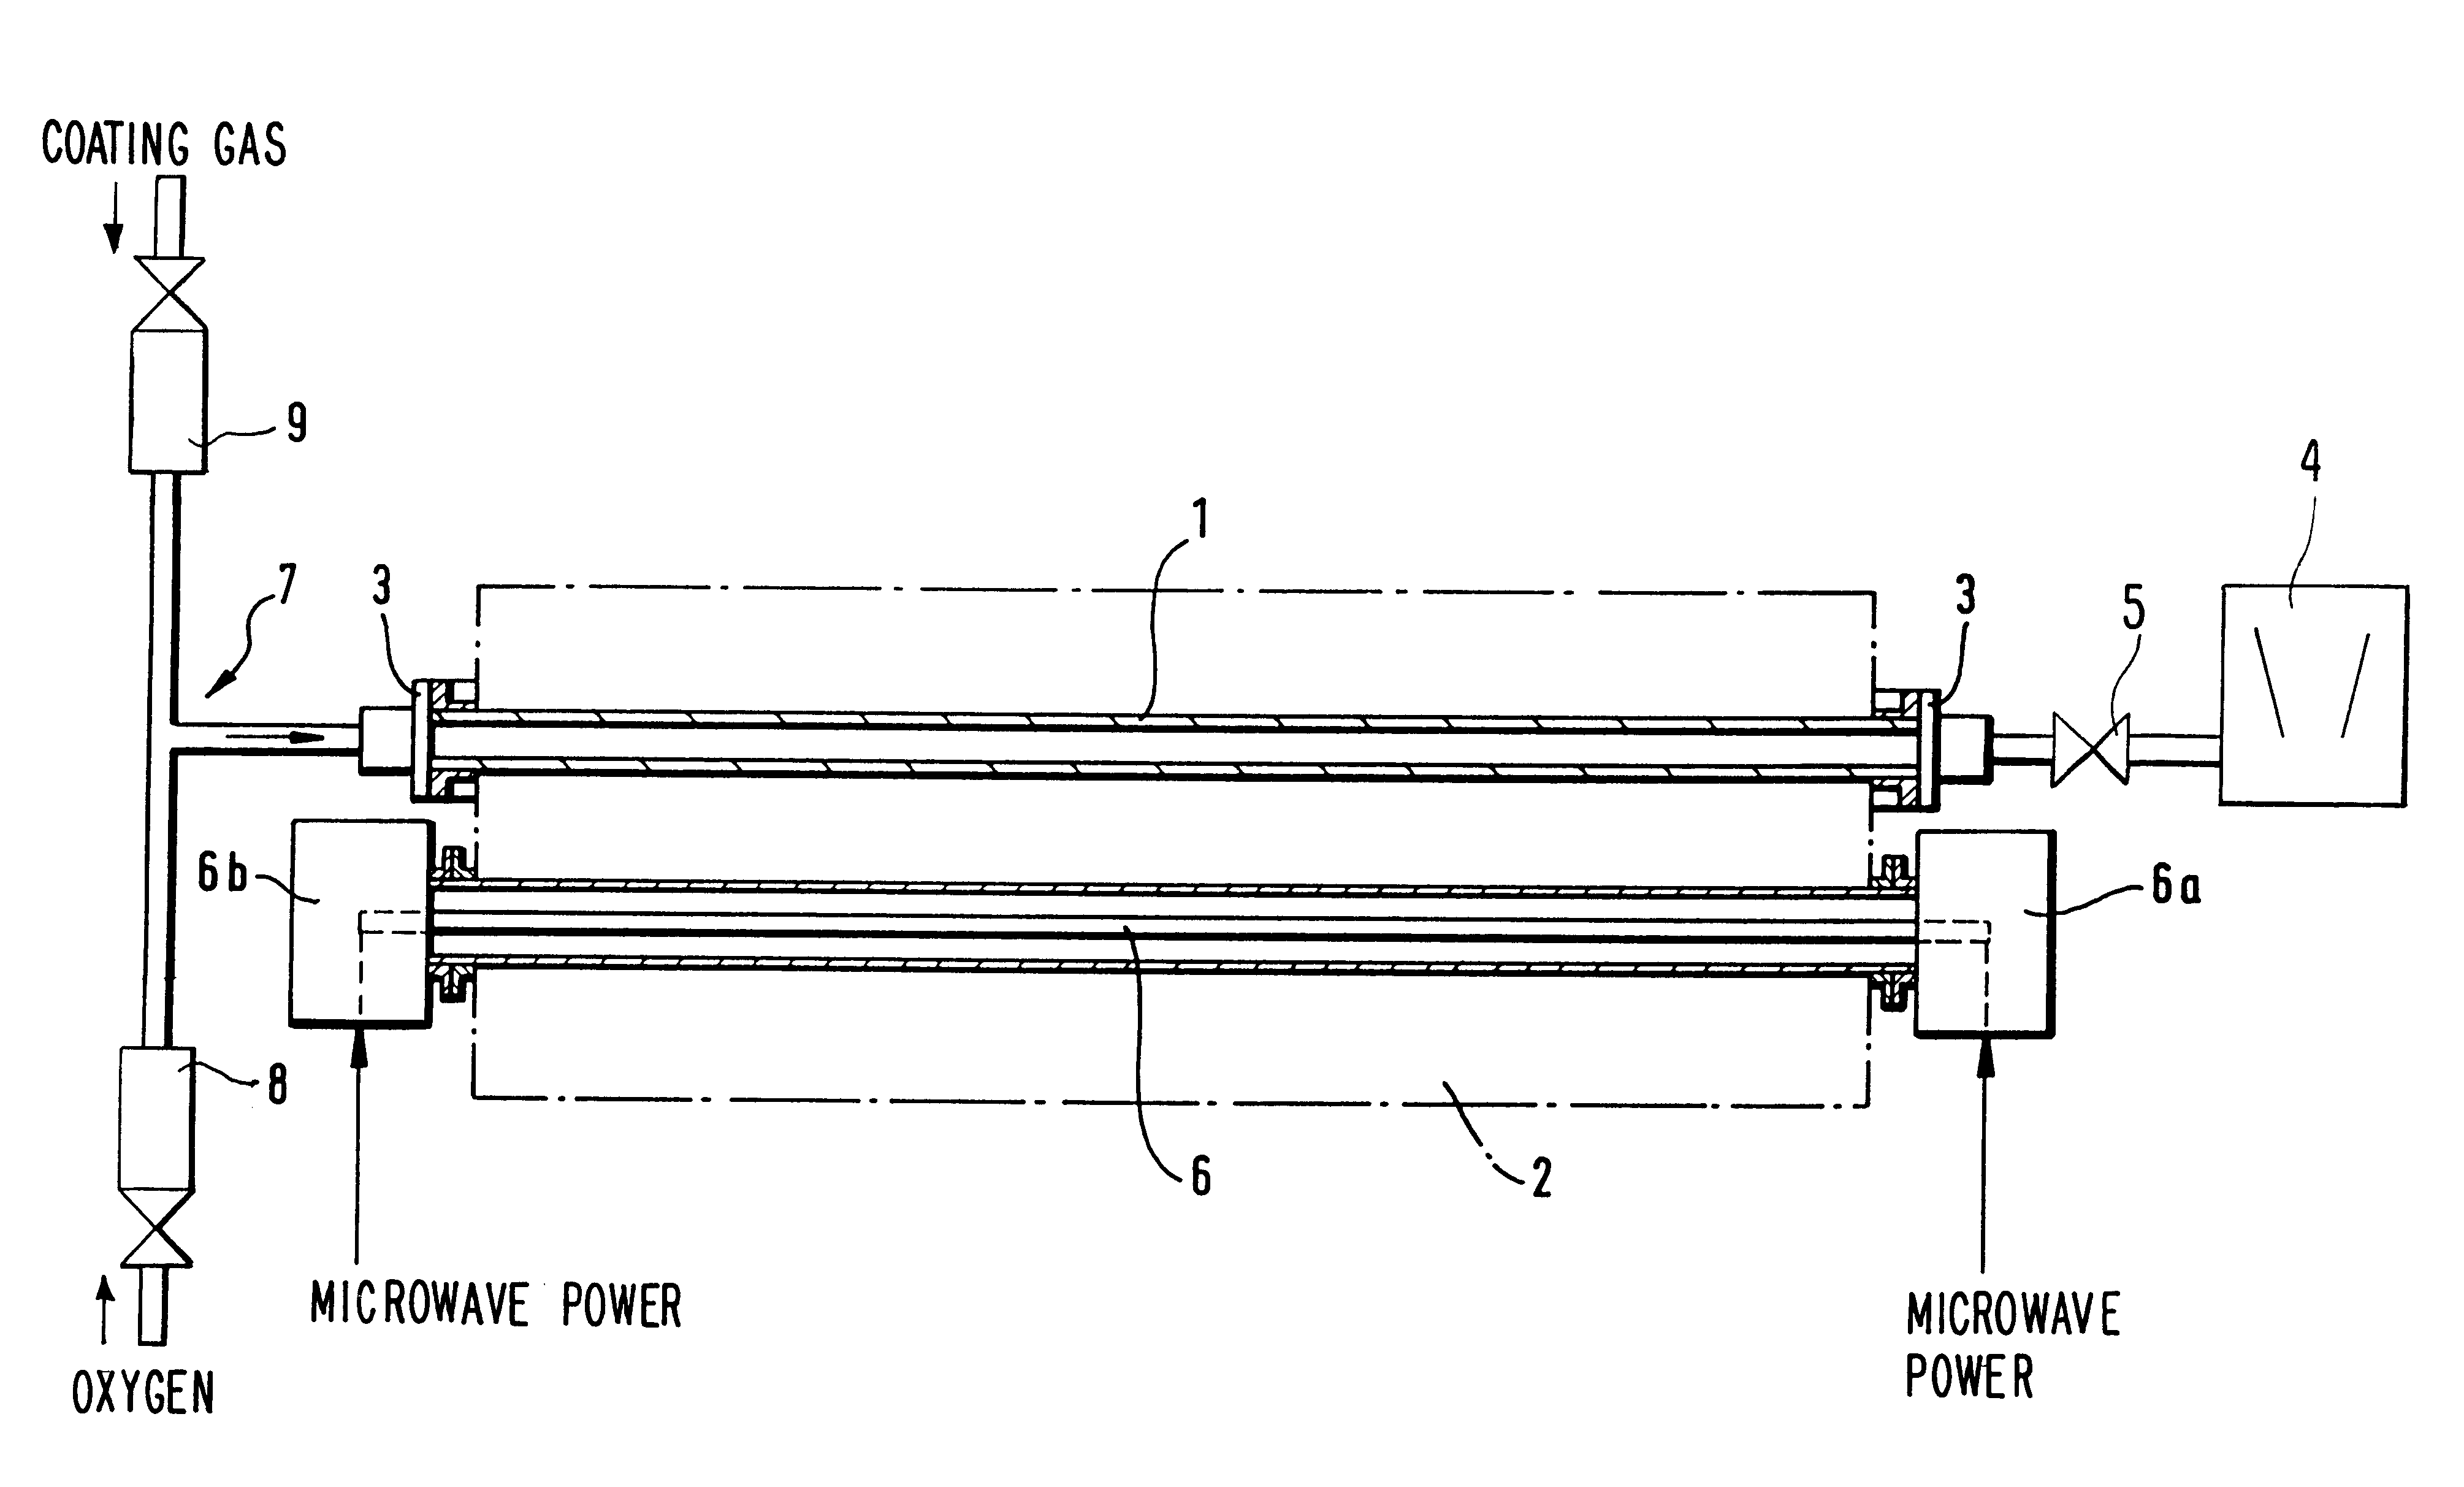 Method of making a hollow, interiorly coated glass body and a glass tube as a semi-finished product for forming the glass body